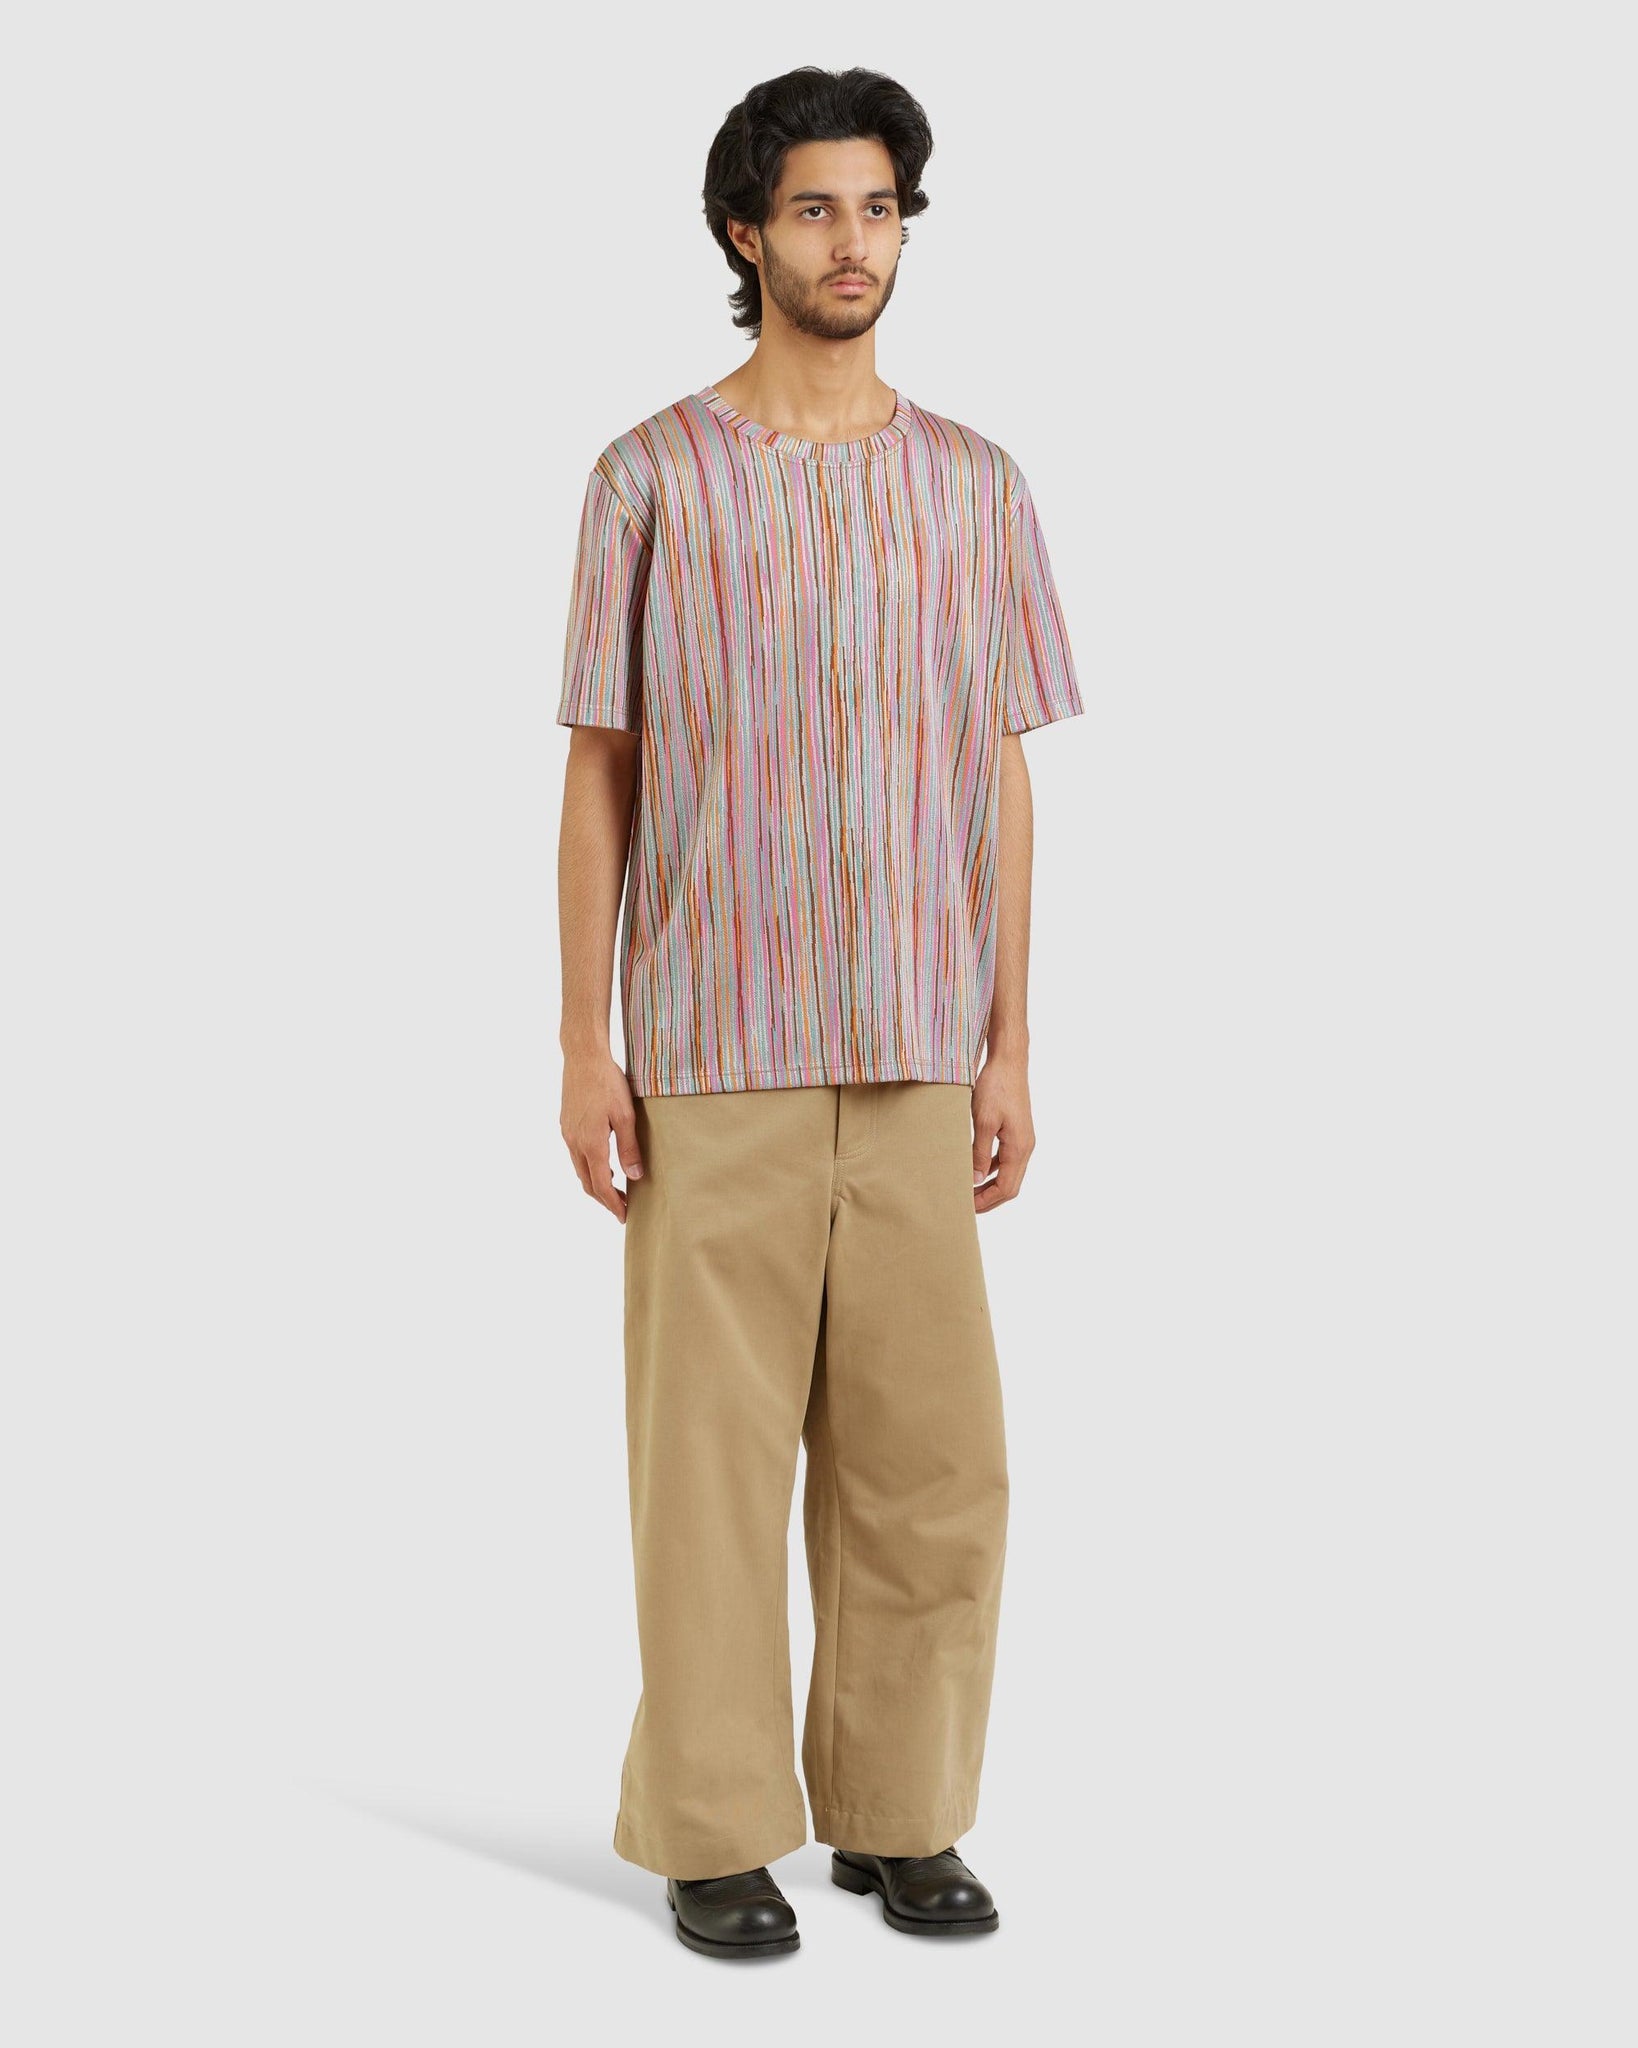 Subzi Tee Aster Stripe - {{ collection.title }} - Chinatown Country Club 